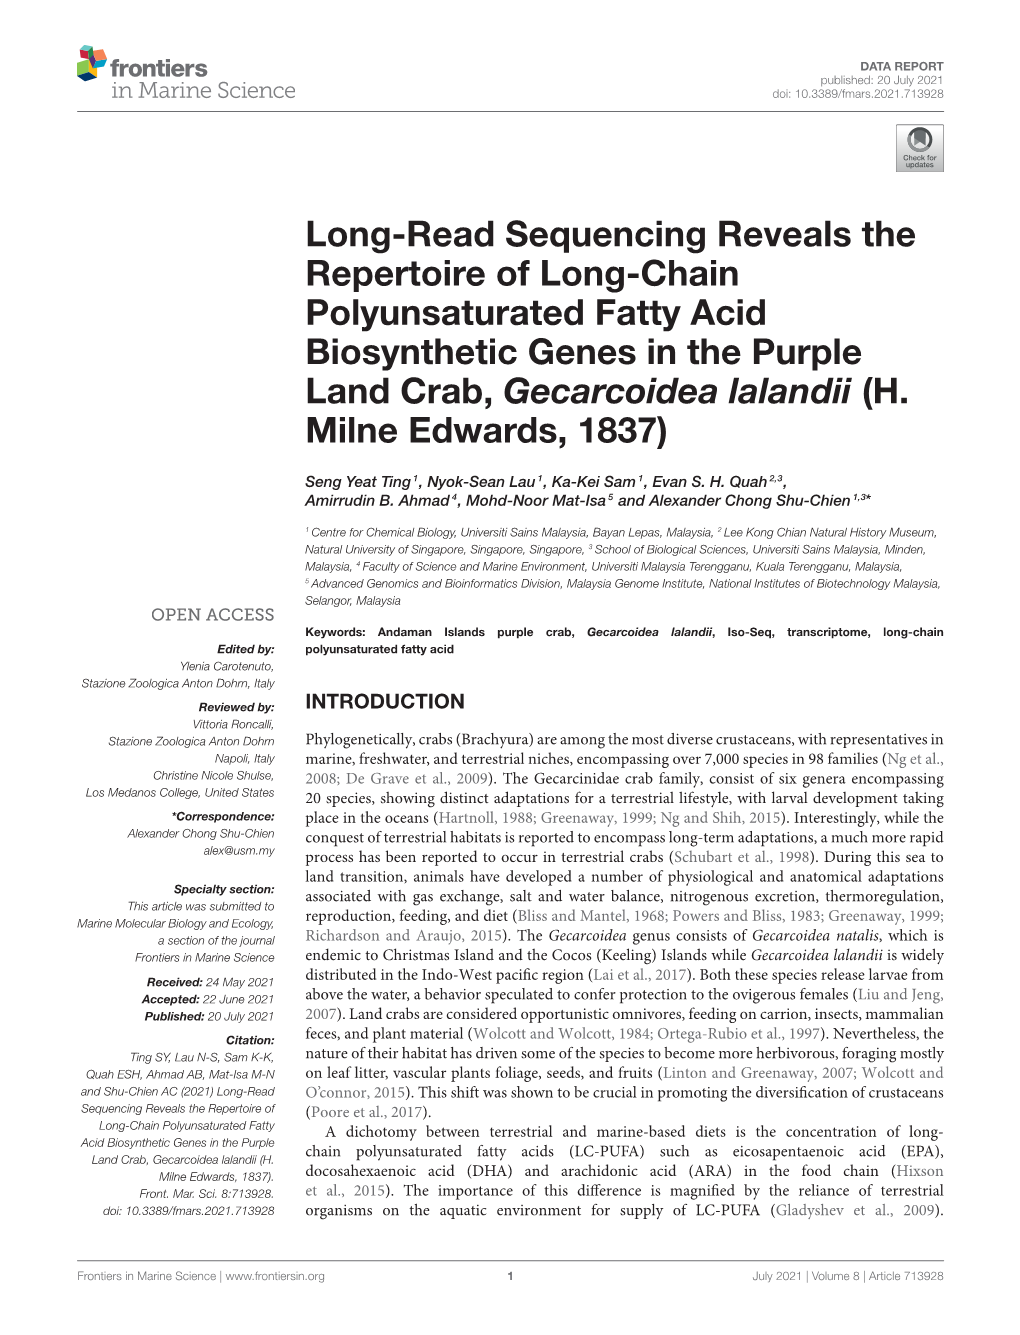 Long-Read Sequencing Reveals the Repertoire of Long-Chain Polyunsaturated Fatty Acid Biosynthetic Genes in the Purple Land Crab, Gecarcoidea Lalandii (H